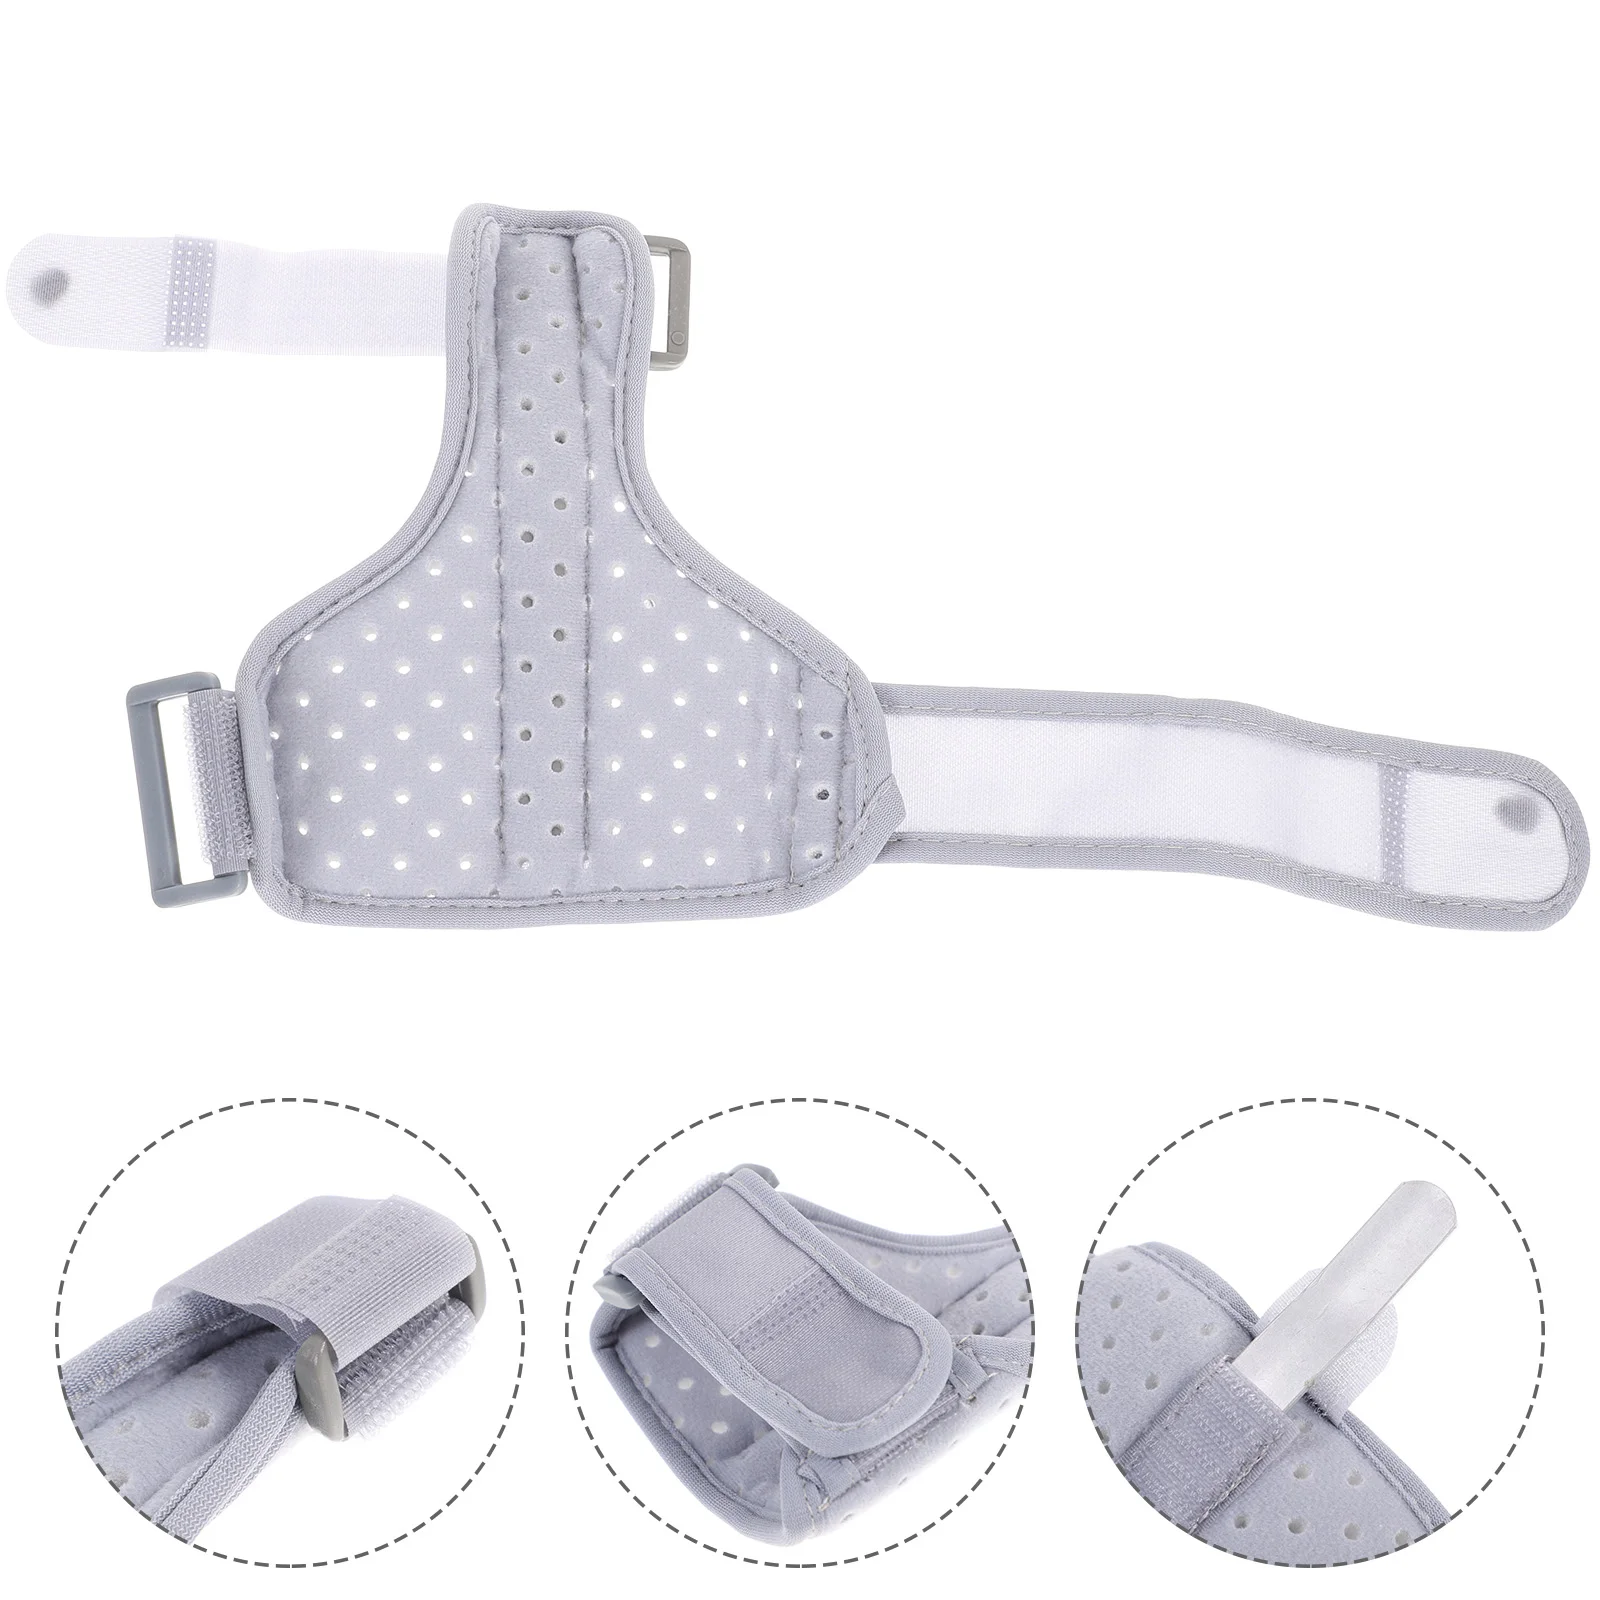 

Thumb Brace Splint Wrist Support Spica Stabilizer Arthritis Finger Hand Trigger Andcarpal Tunnel Holder Right Protector